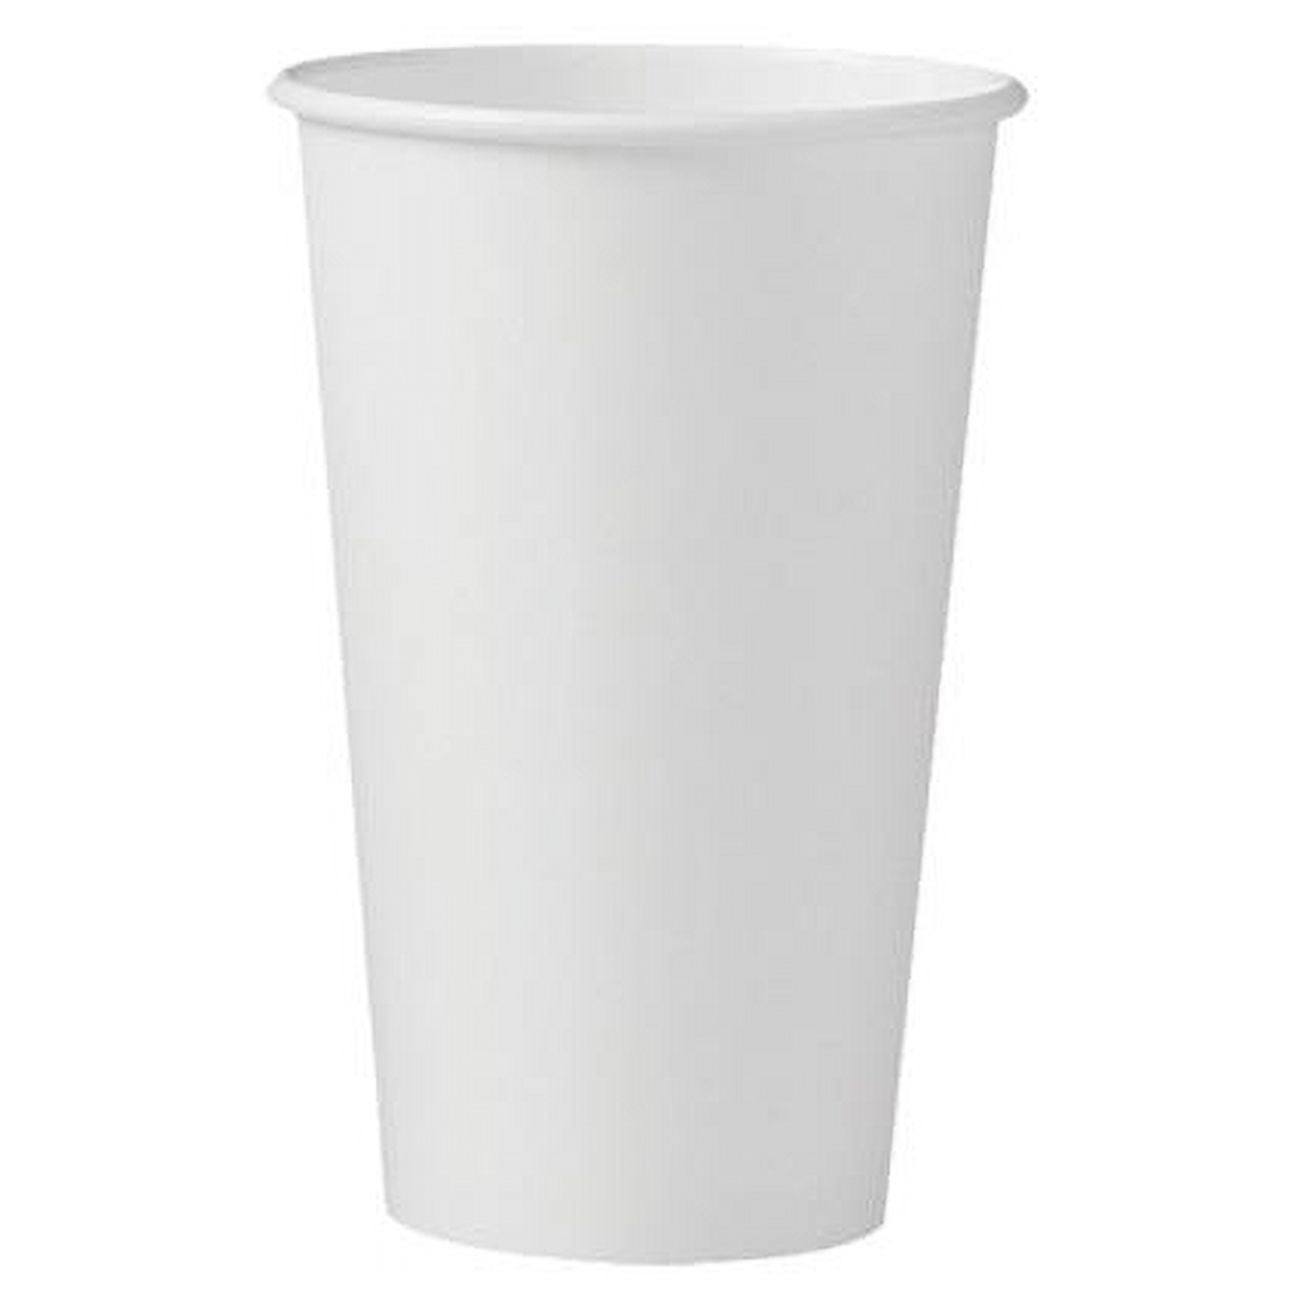 Solo Cup 316w-2050 Cpc 16 Oz Poly Paper Hot Cup, White - Case Of 1000